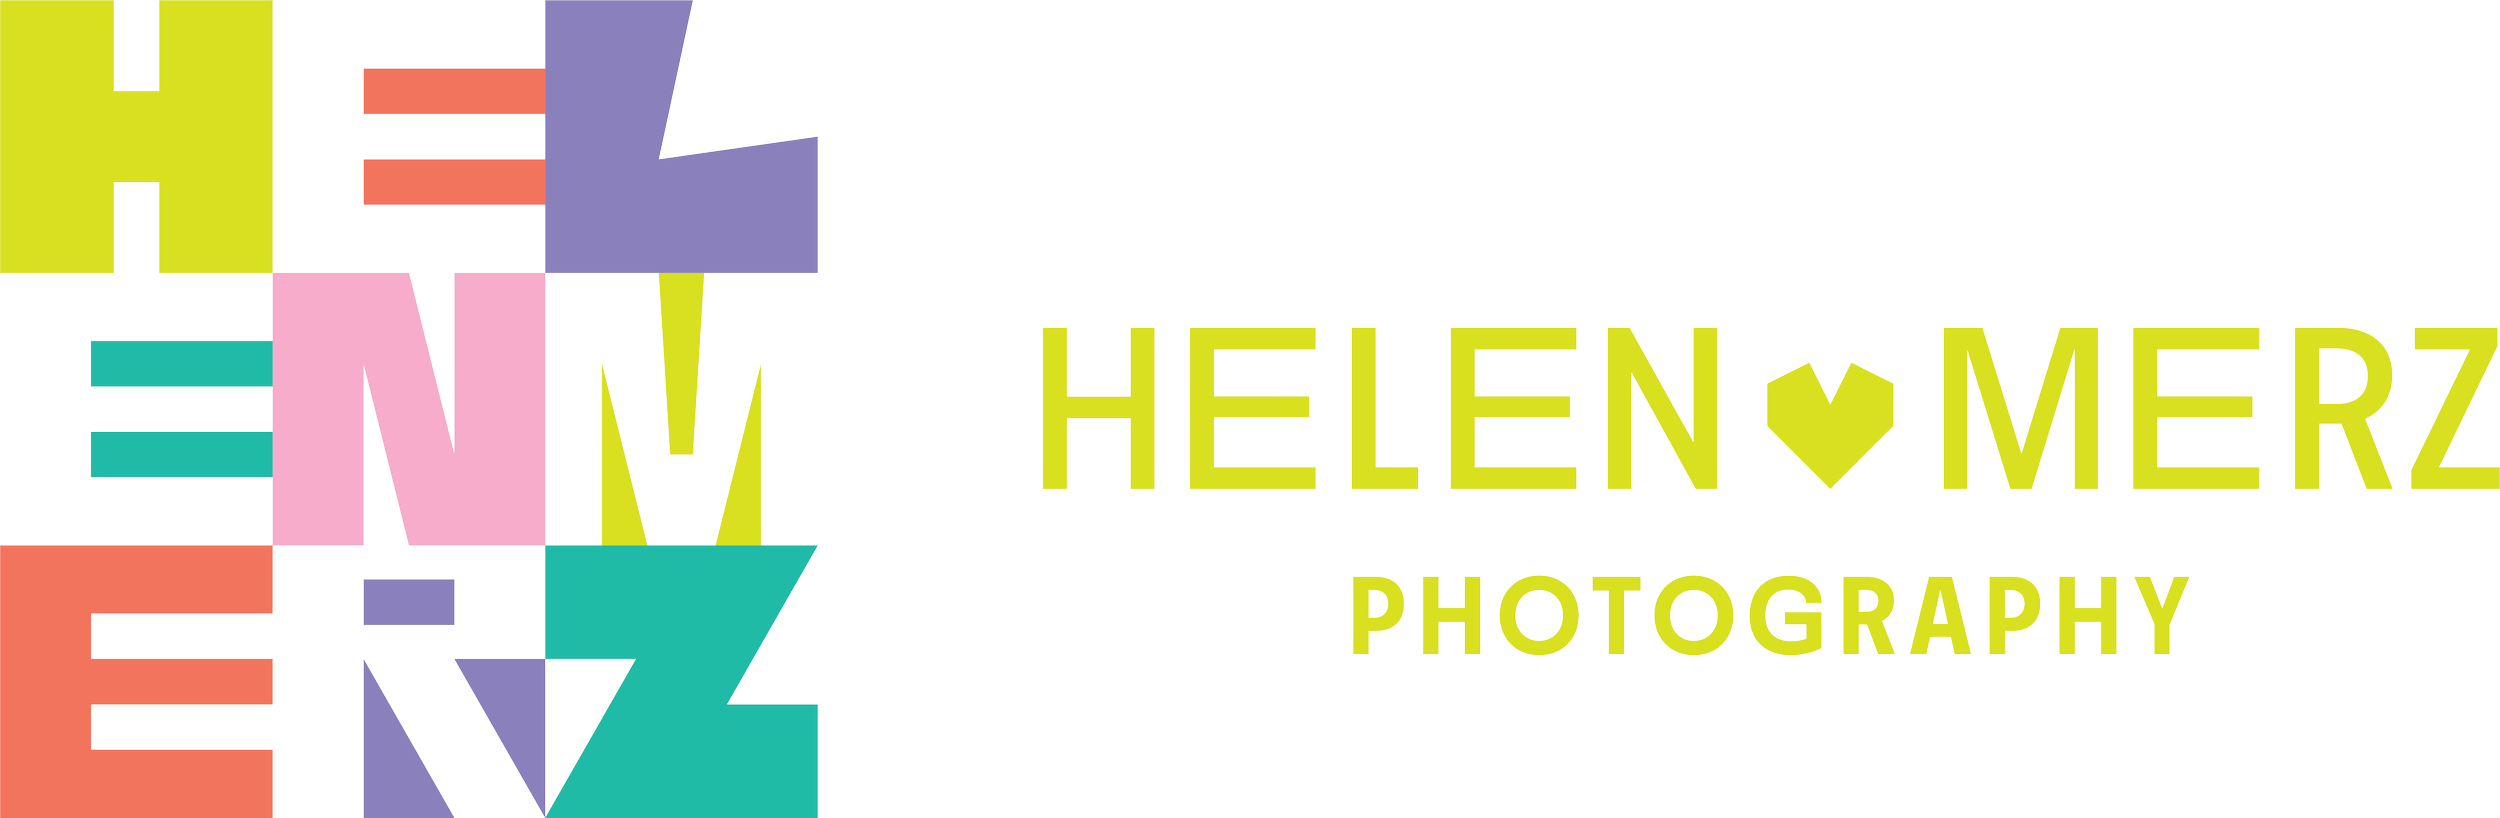 Helen Merz Primary Logo With Wordmark Horizontal - Multicolor With Highlighter.png